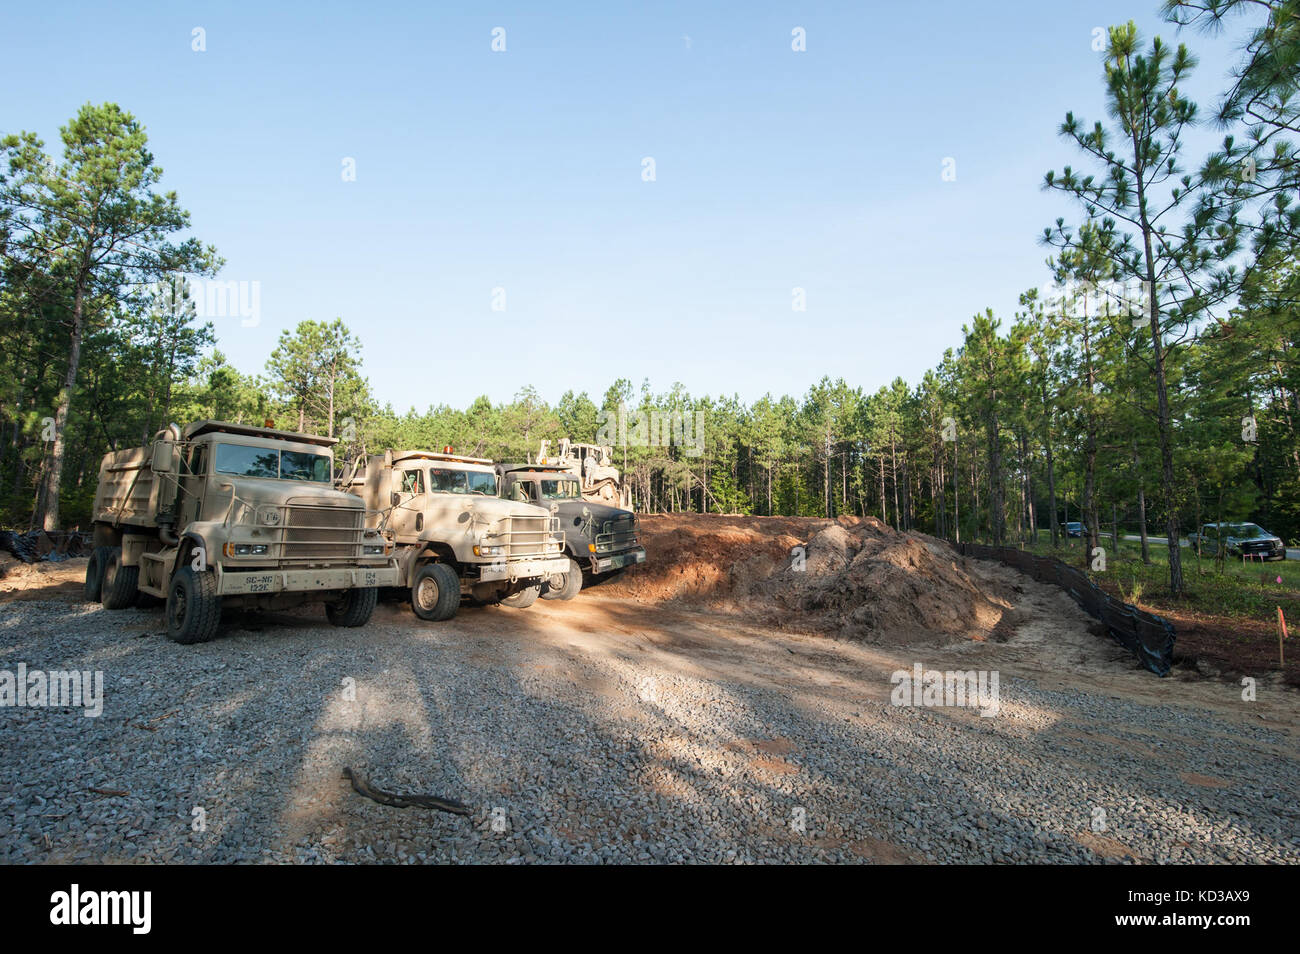 Soldiers of the 124th and 125th Engineer Companies, 122nd Engineer Battalion, worked on several projects as part of their 2015 annual training exercise at the Savannah River Site near Aiken, S.C., July 22, 2015.  The exercise was the result of a joint project between the South Carolina National Guard and the Savannah River Site that provided civil-works training opportunities for the soldiers and needed infrastructure improvements for the site.  The exercise was scheduled to run between July 8th and July 25th. (Courtesy Photo) Stock Photo